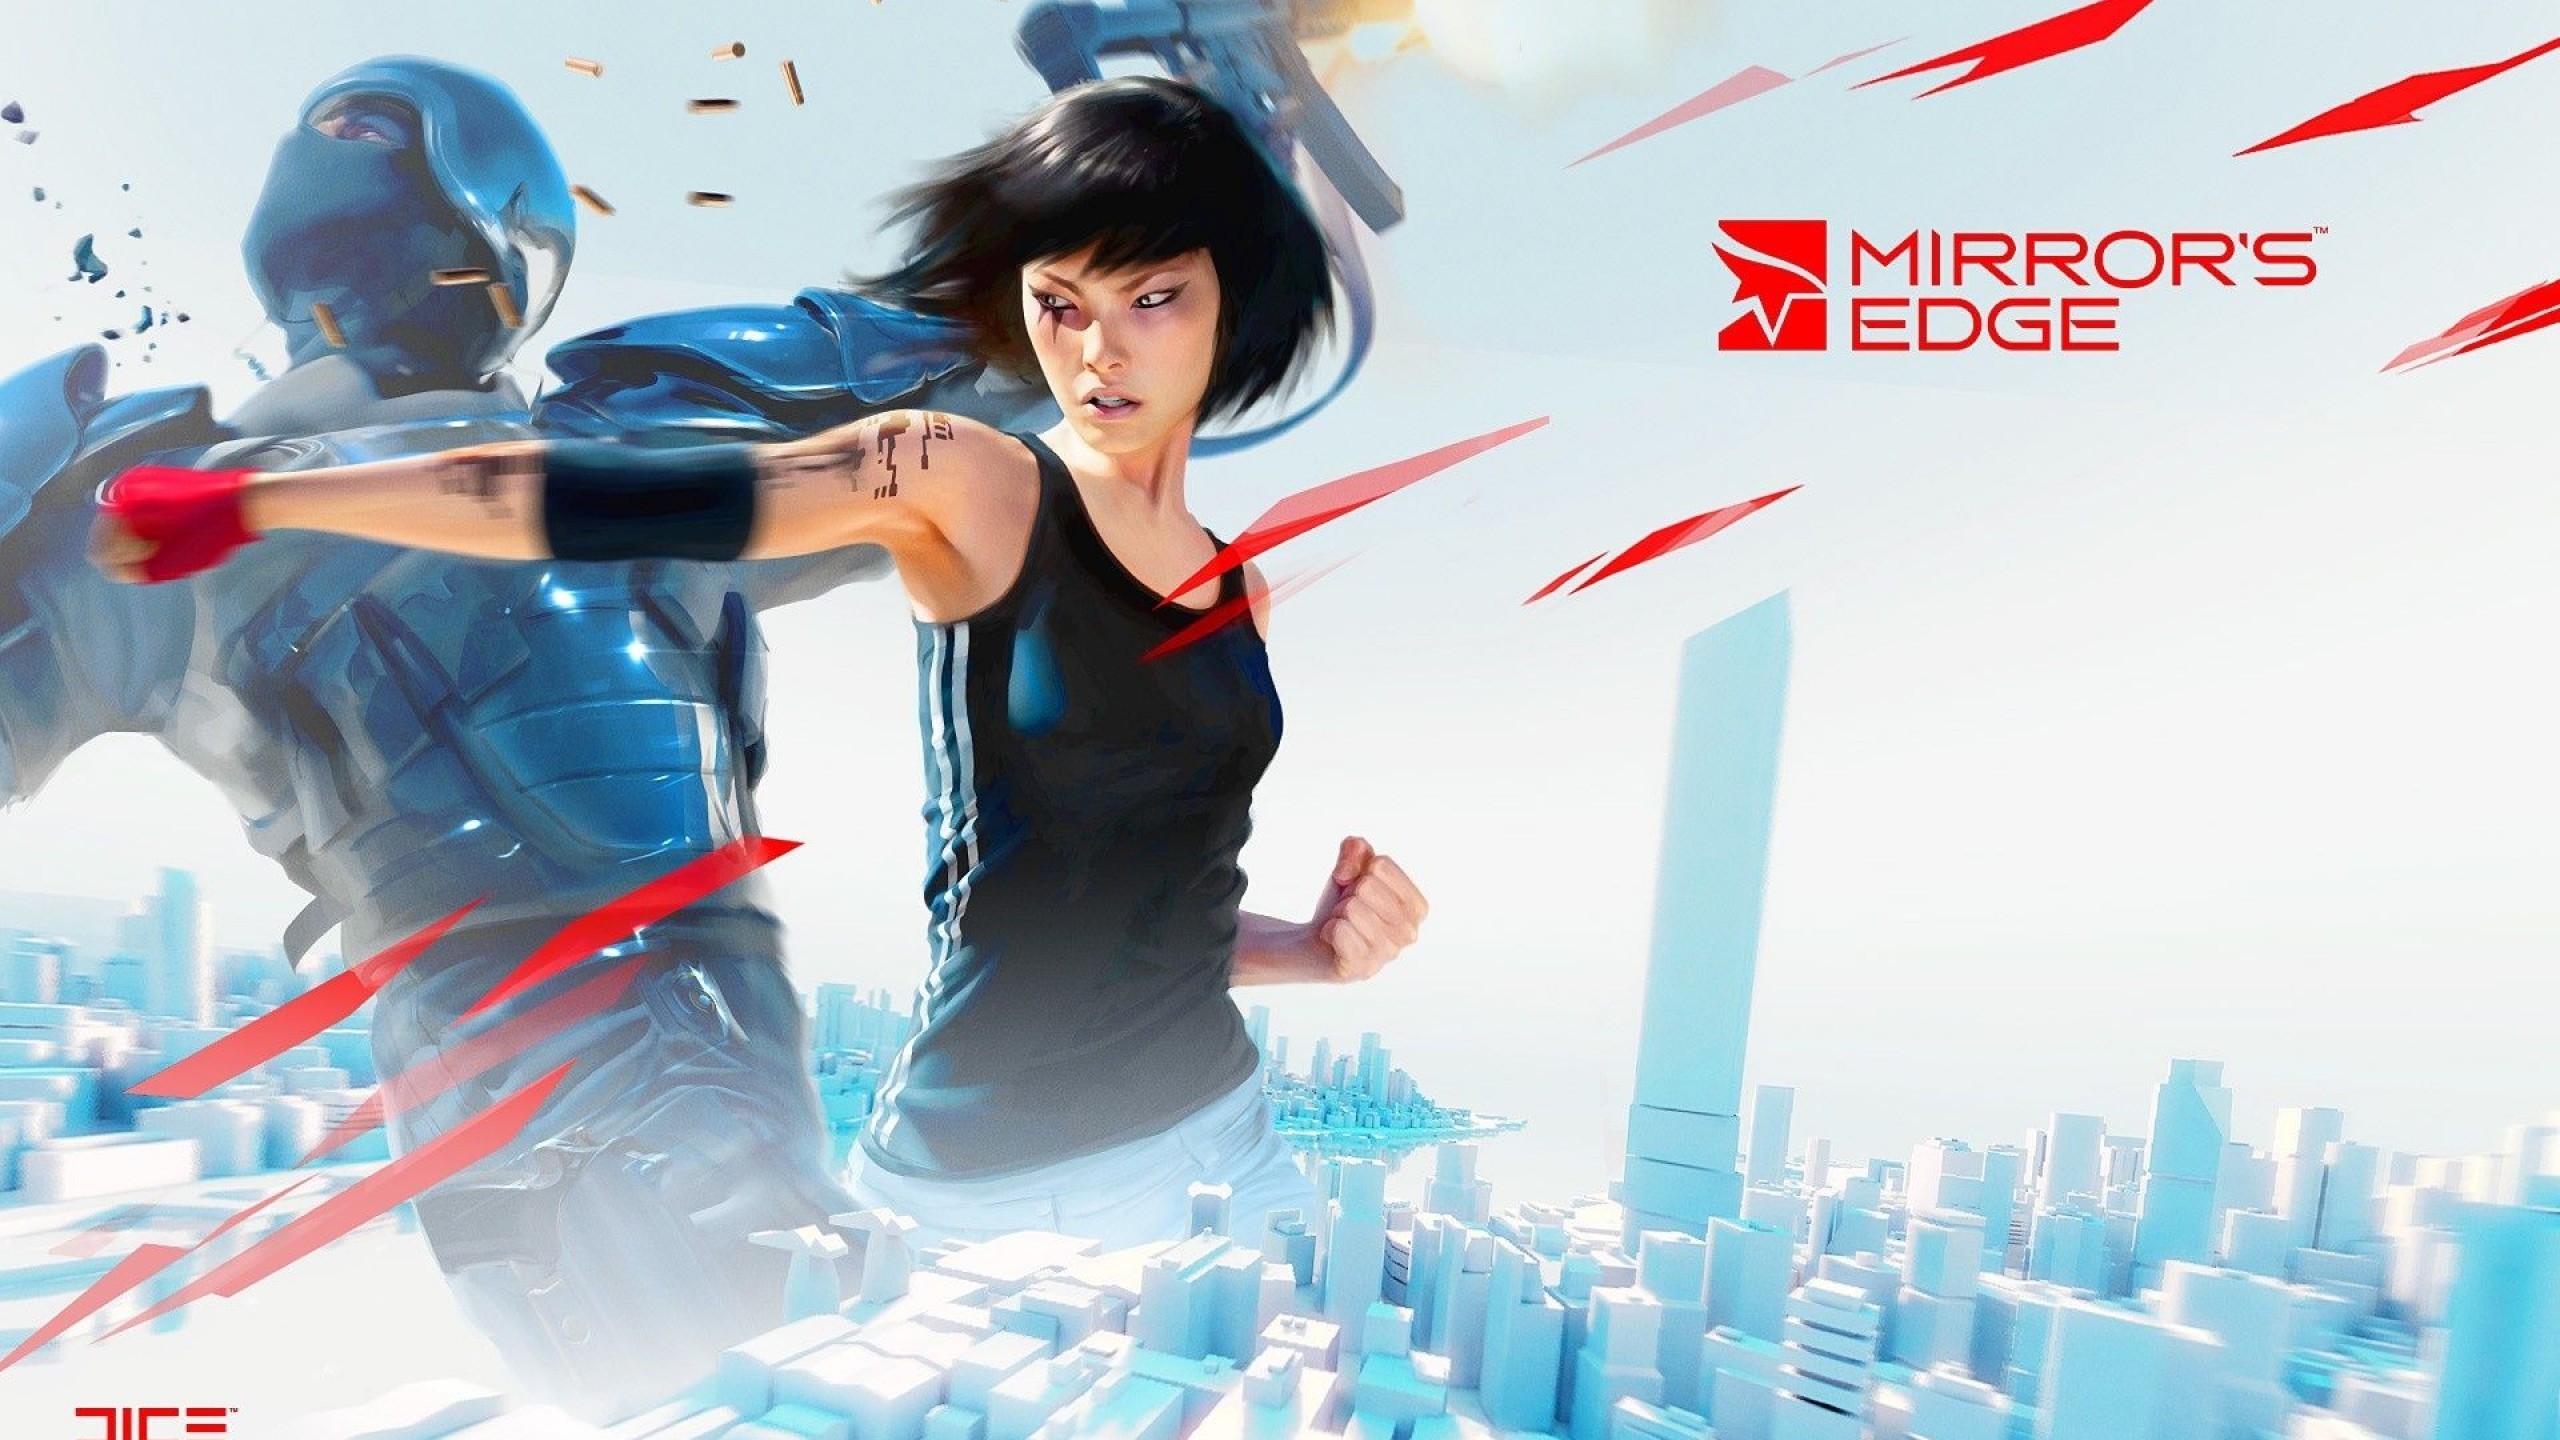 Mirrors Edge 2 Game for 2560x1440 HDTV resolution